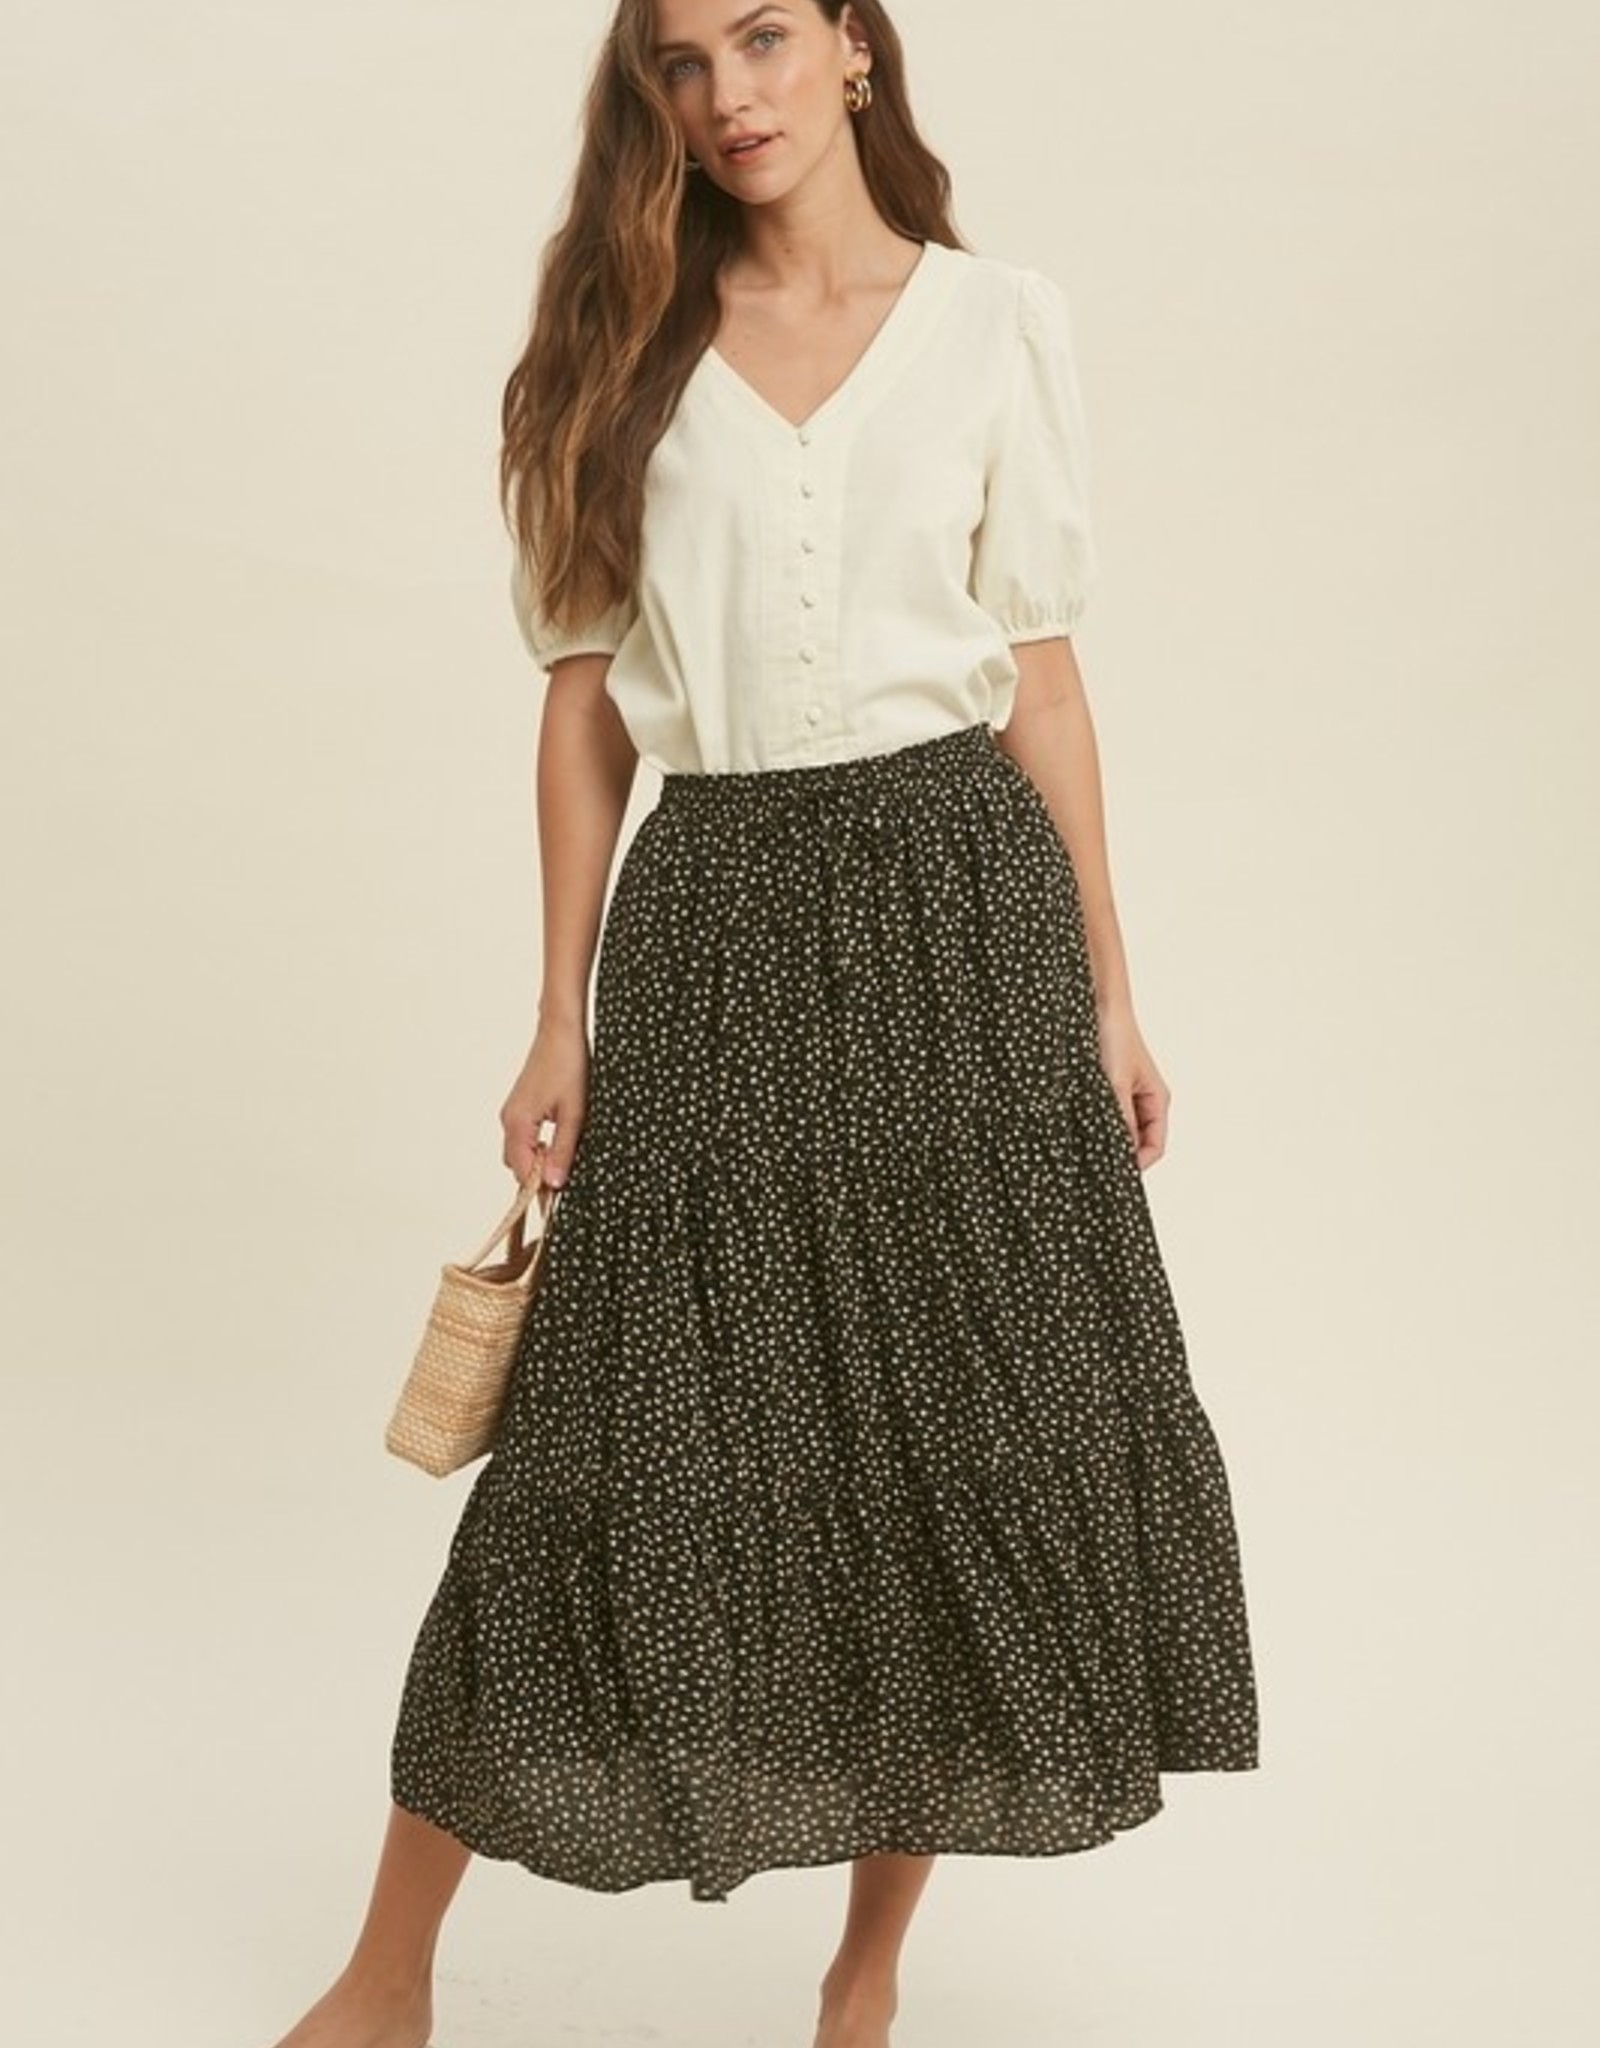 The Floral Tiered Maxi Skirt